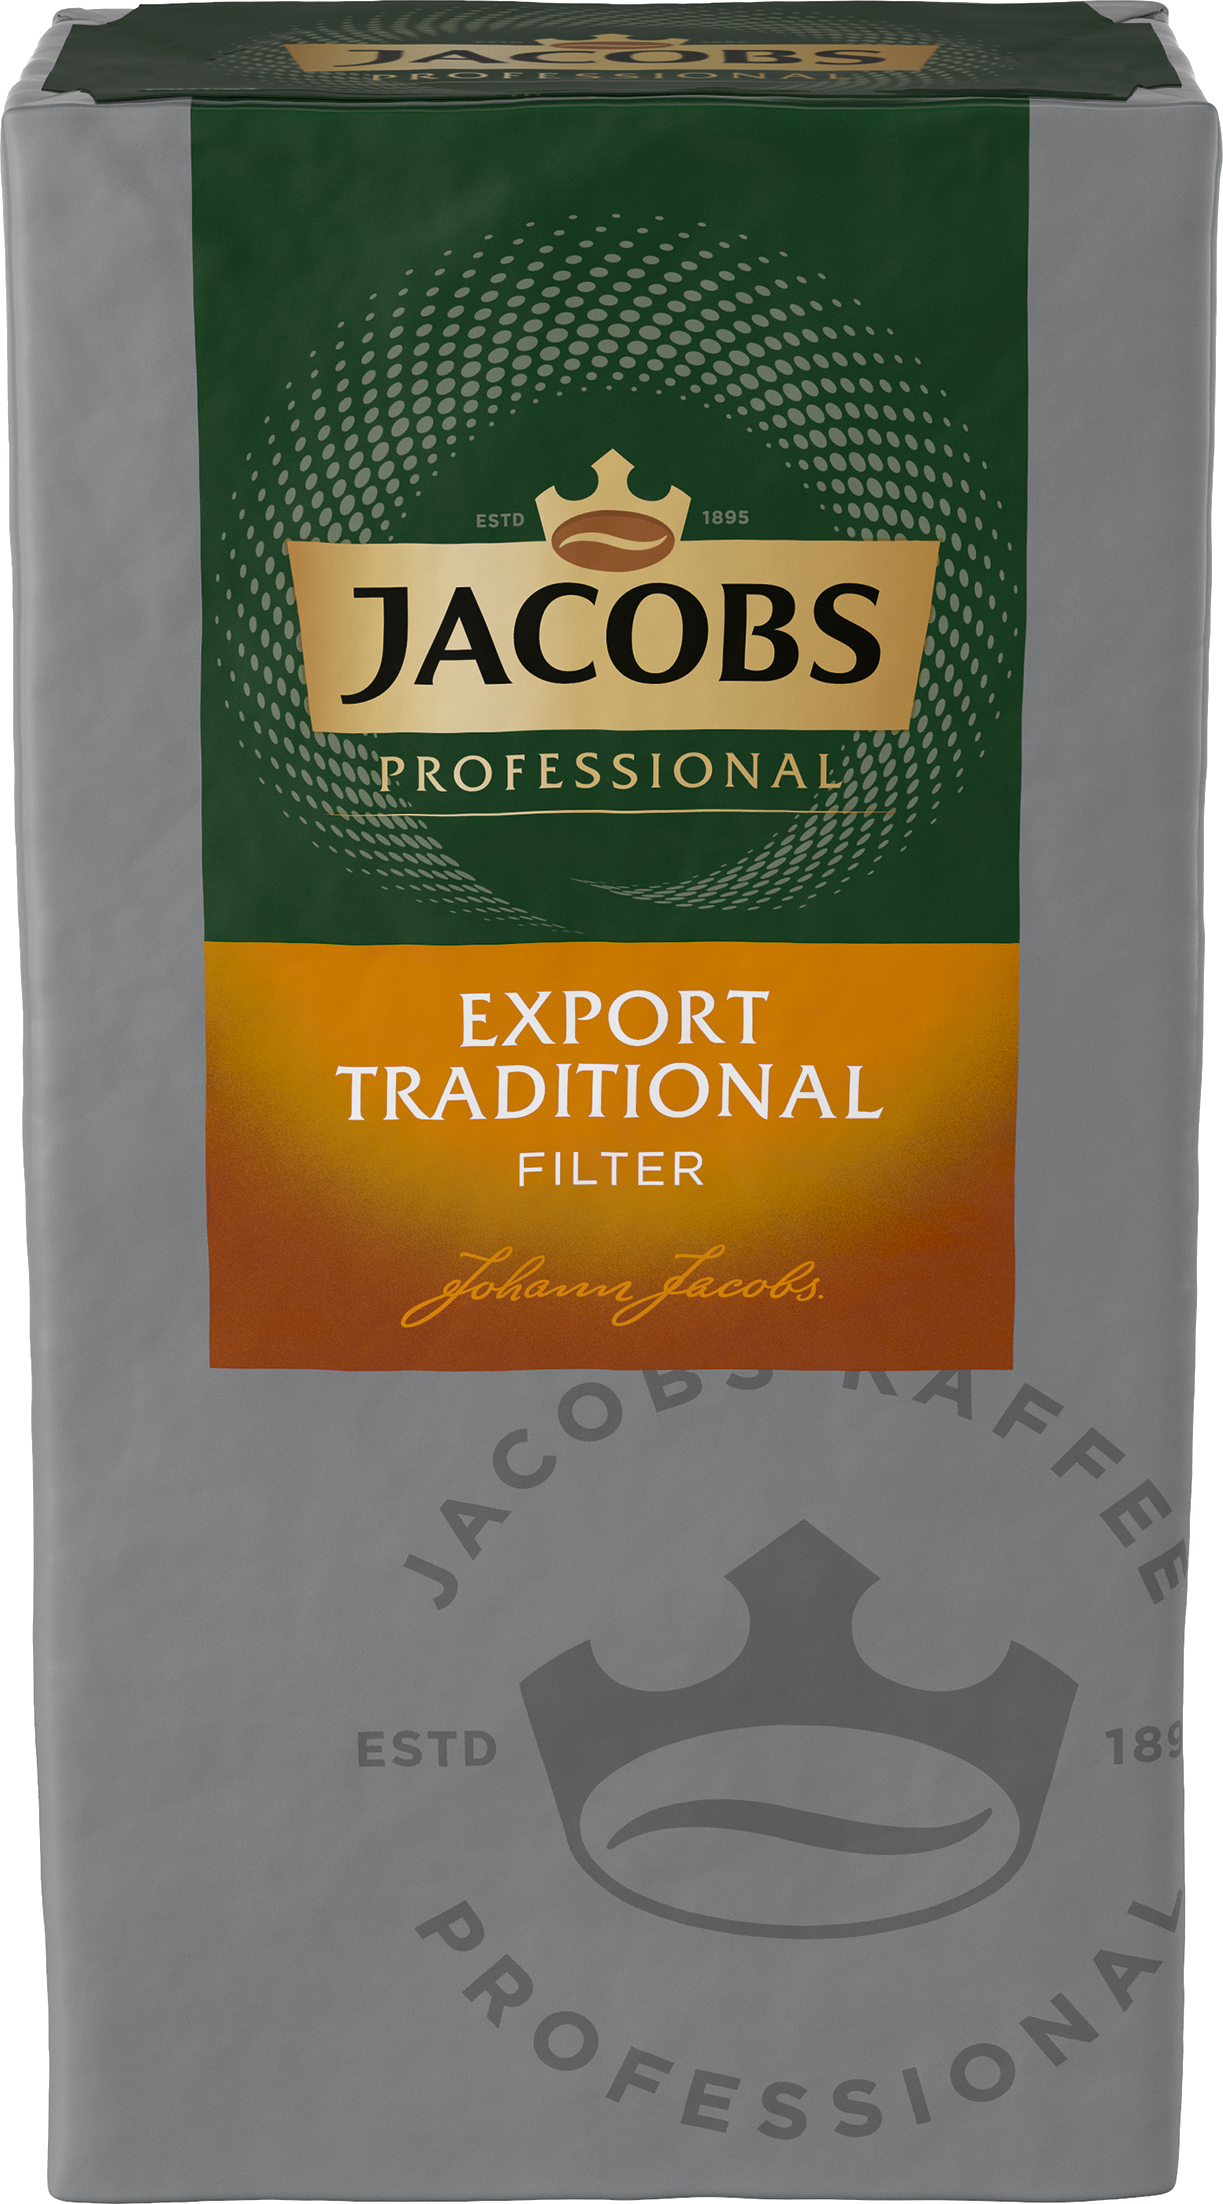 Jacobs Export Traditional